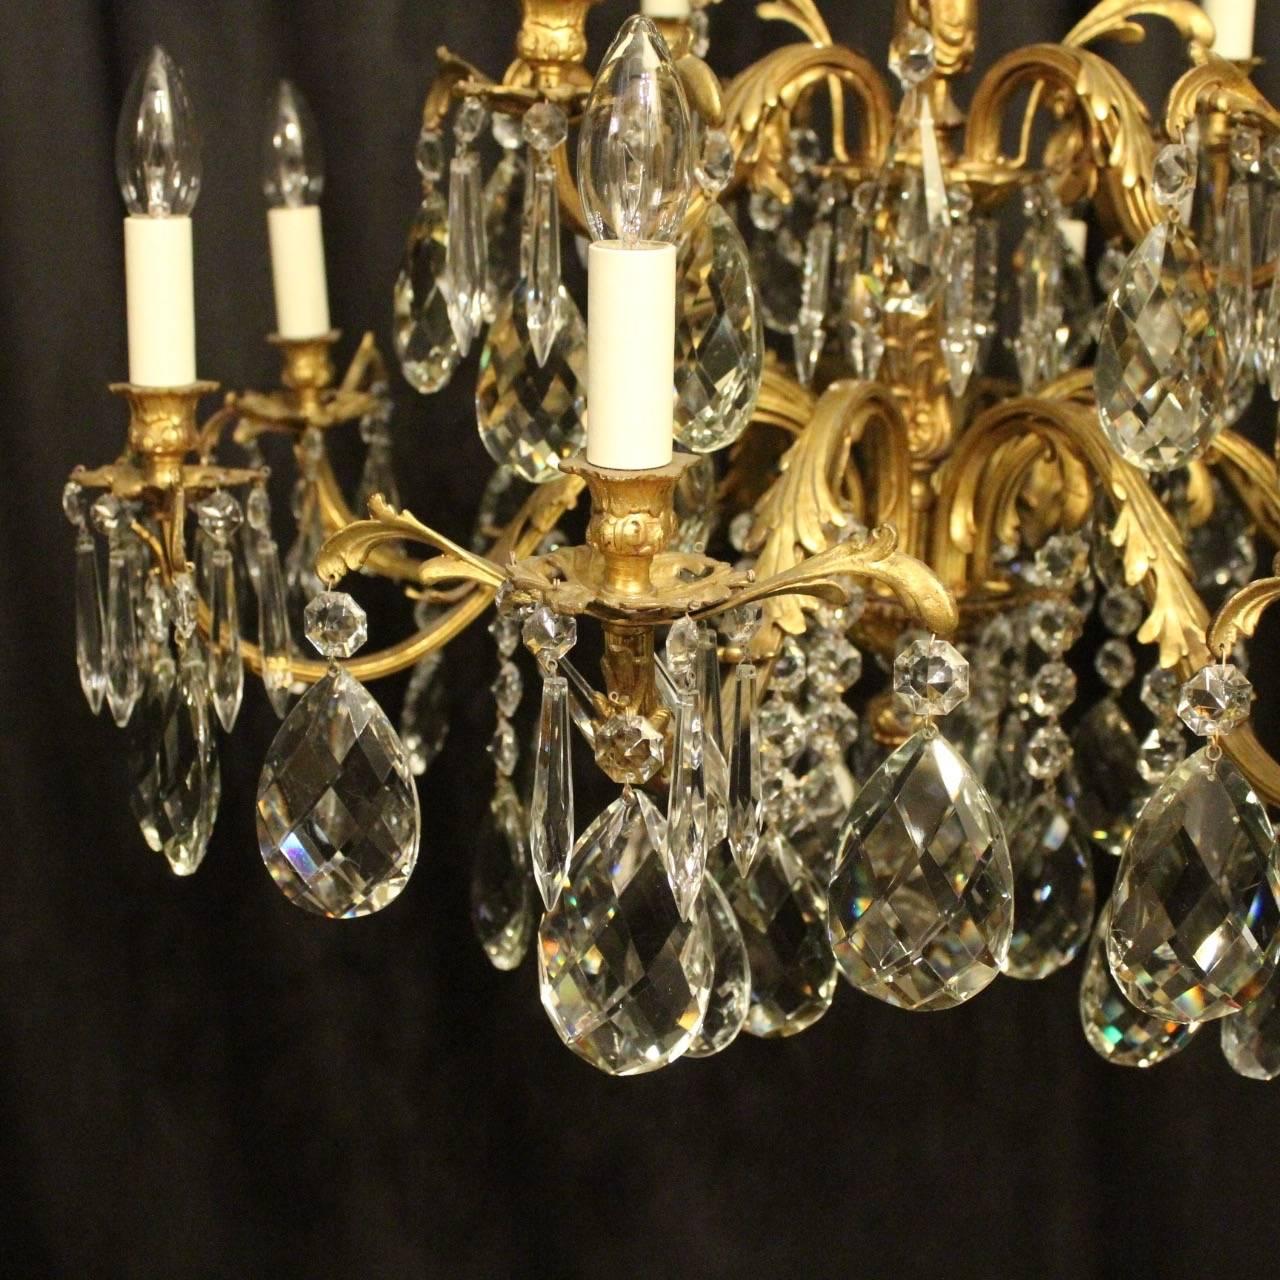 An Italian gilded cast bronze and crystal twelve-light double tiered antique chandelier, the eight and four-light leaf reeded scrolling arms with leaf bobeche drip pans and bulbous candle sconces, issuing from an ornate foliated central column with